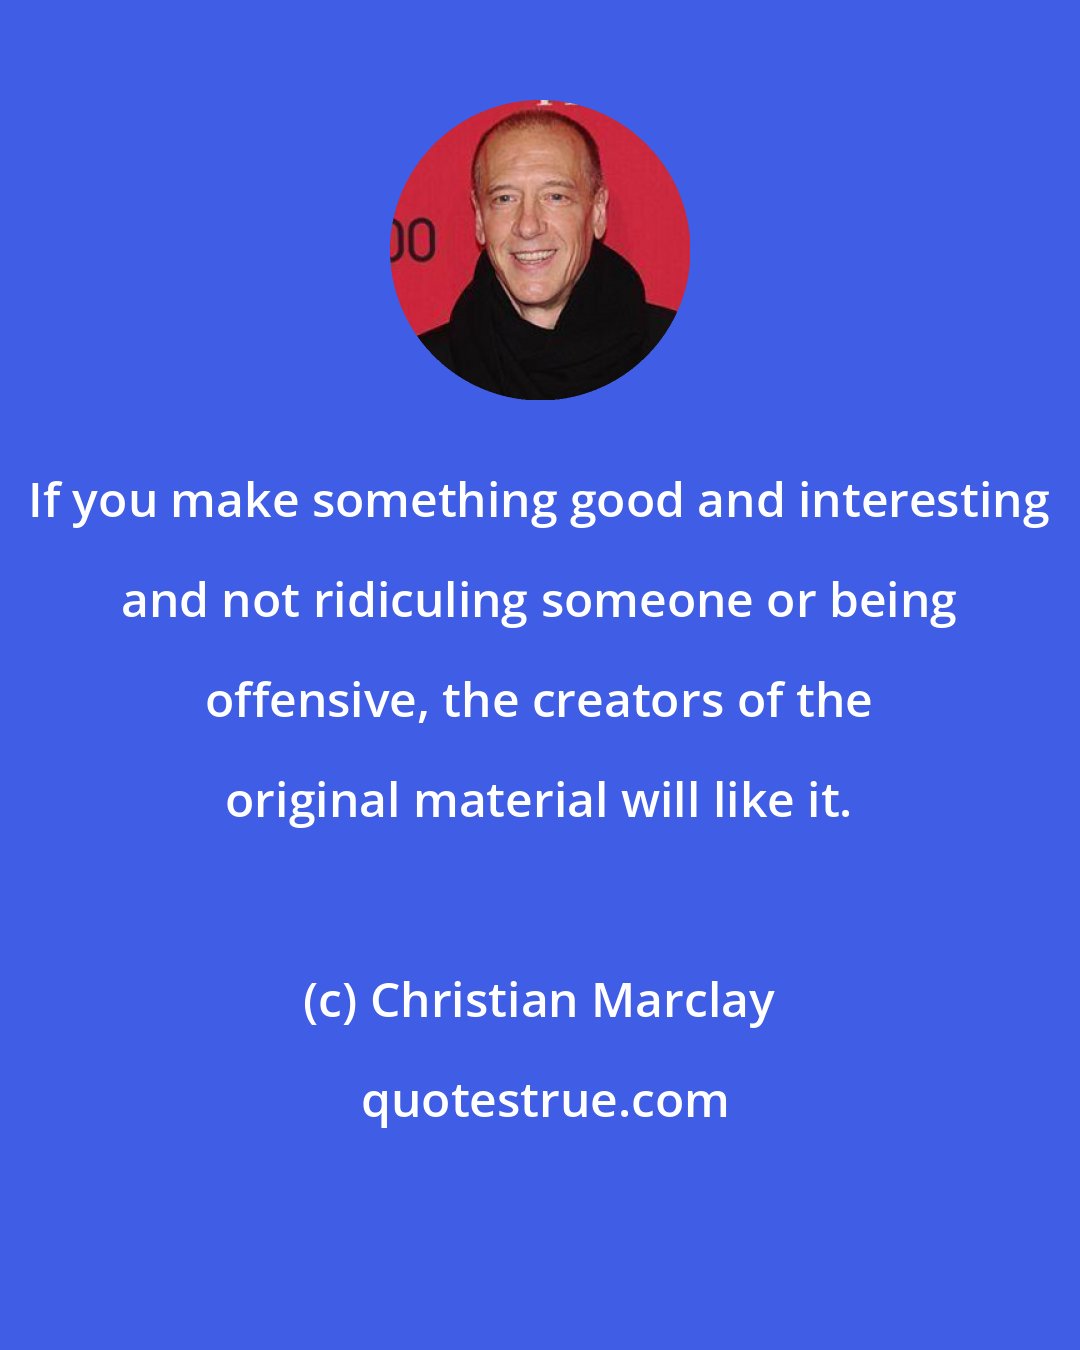 Christian Marclay: If you make something good and interesting and not ridiculing someone or being offensive, the creators of the original material will like it.